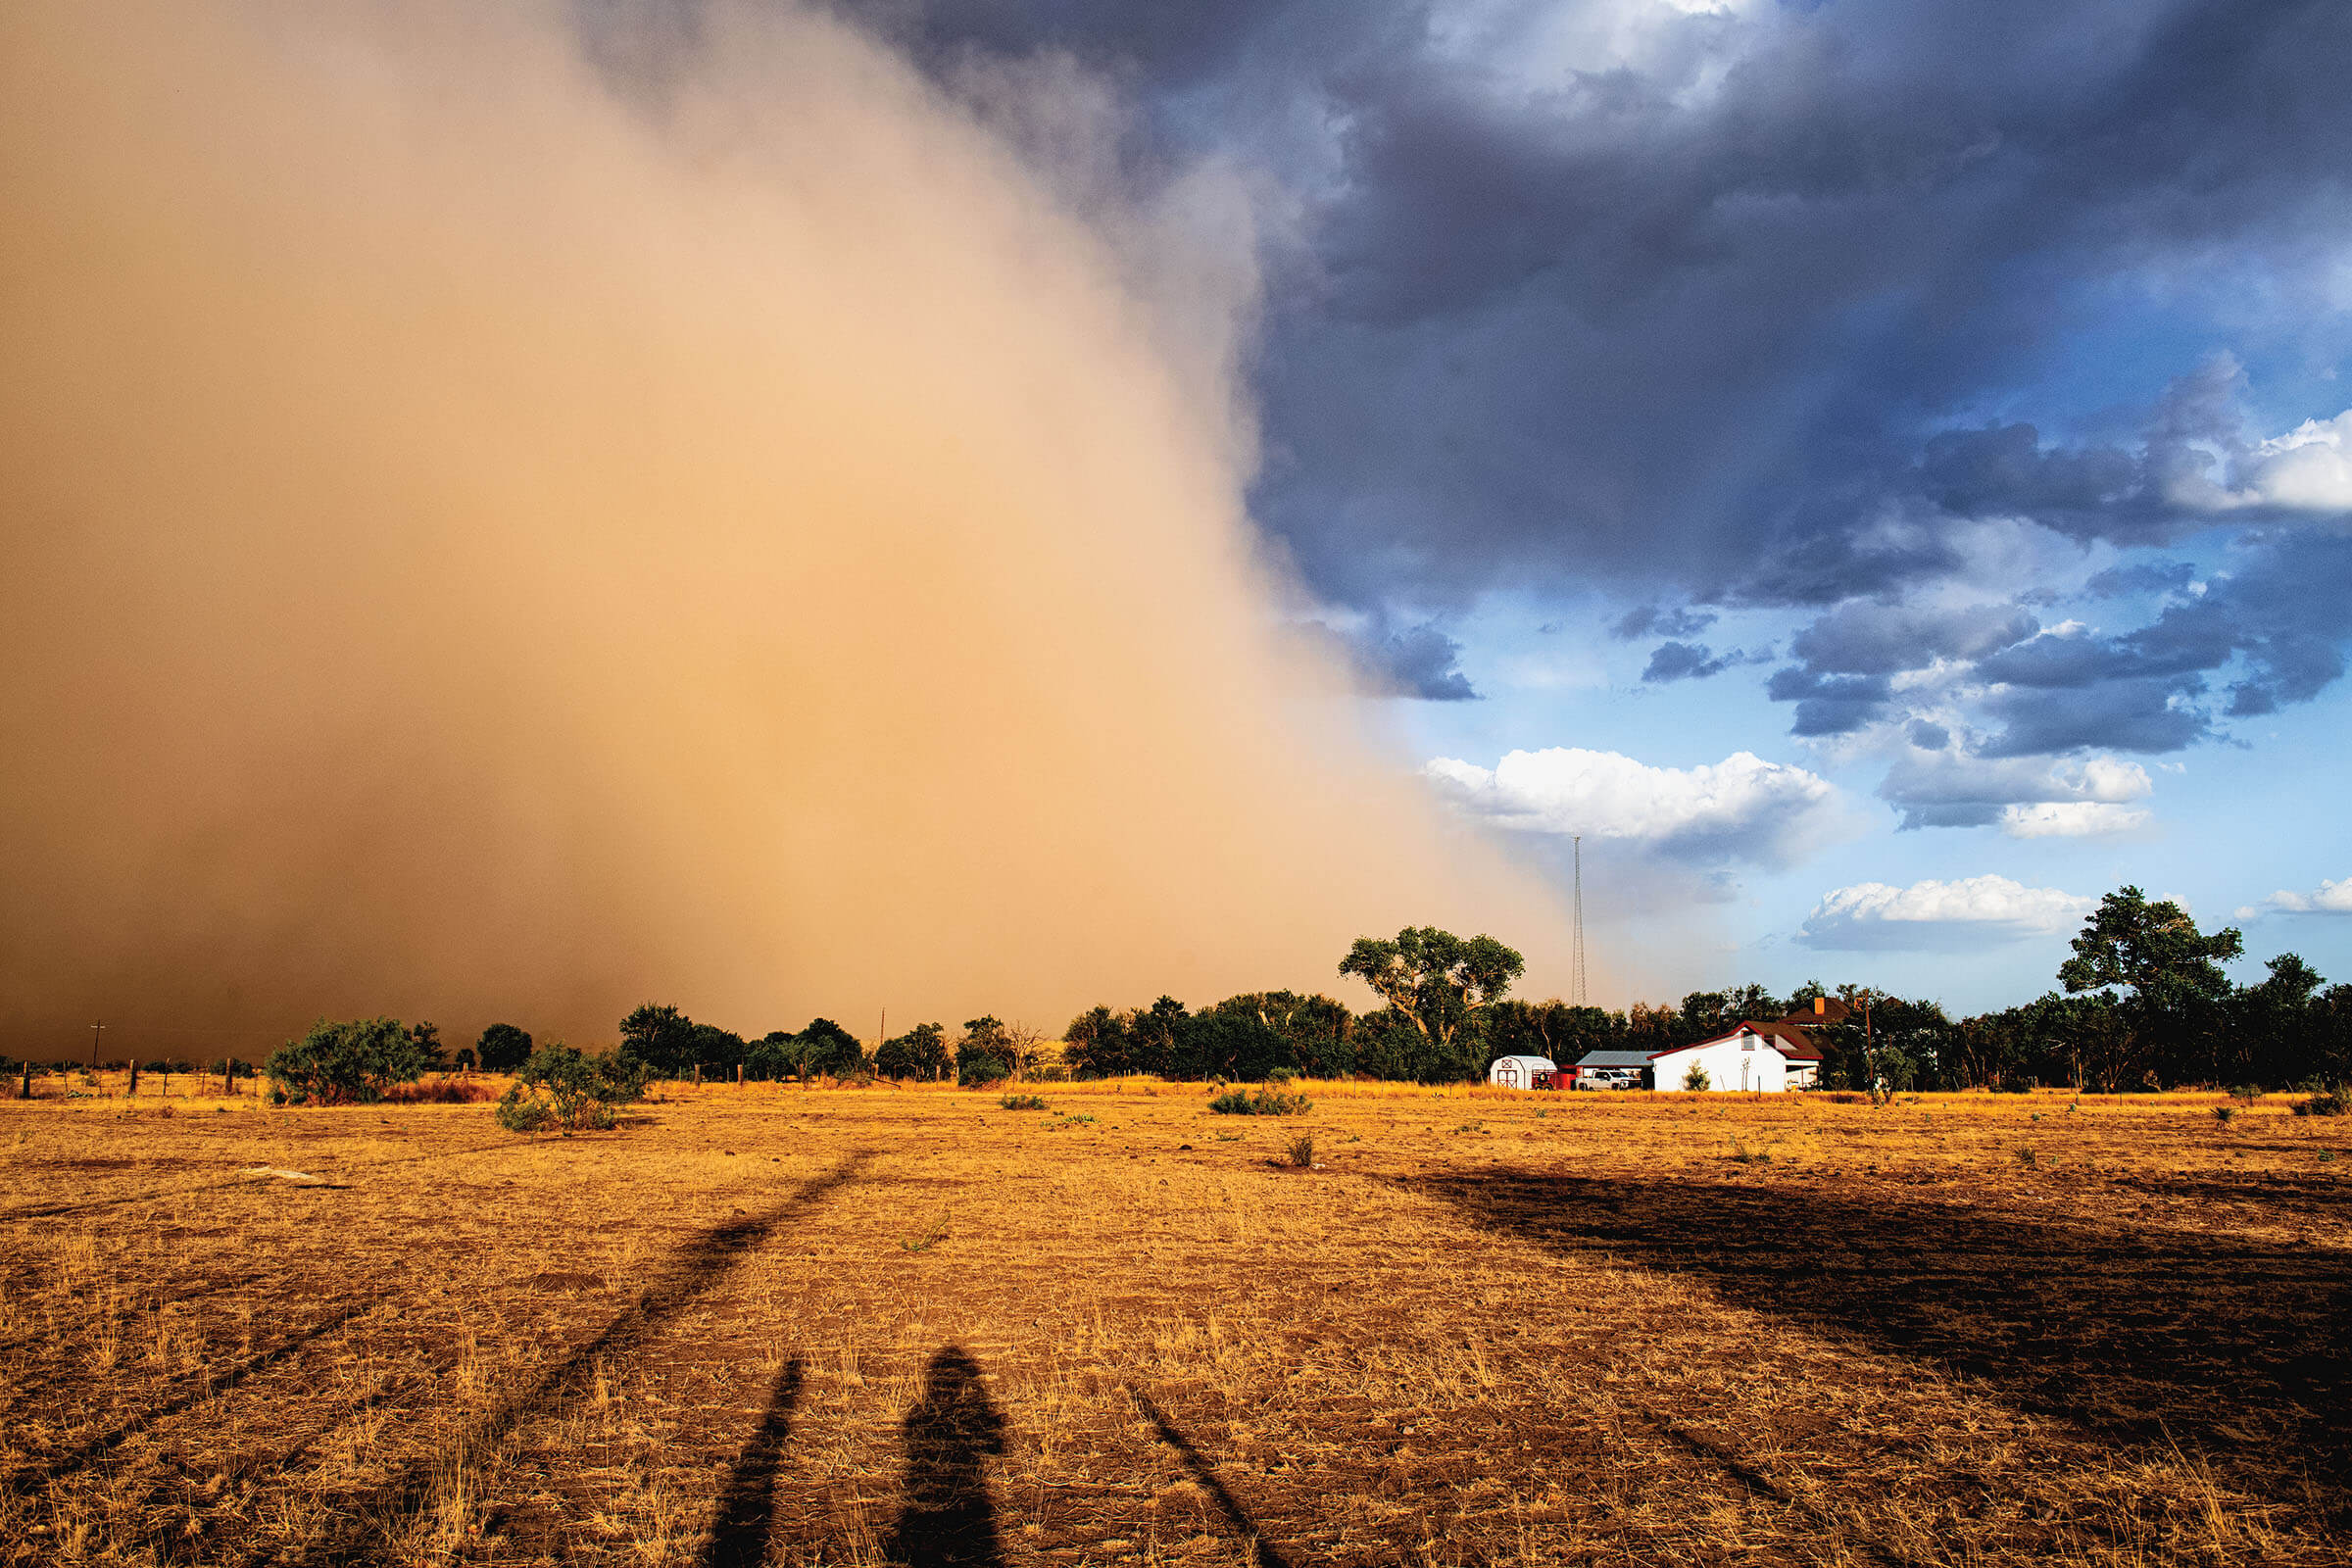 A golden dust storm moves into the frame from left, where a small farmhouse and scrub grass is visible beneath a cloudy blue sky